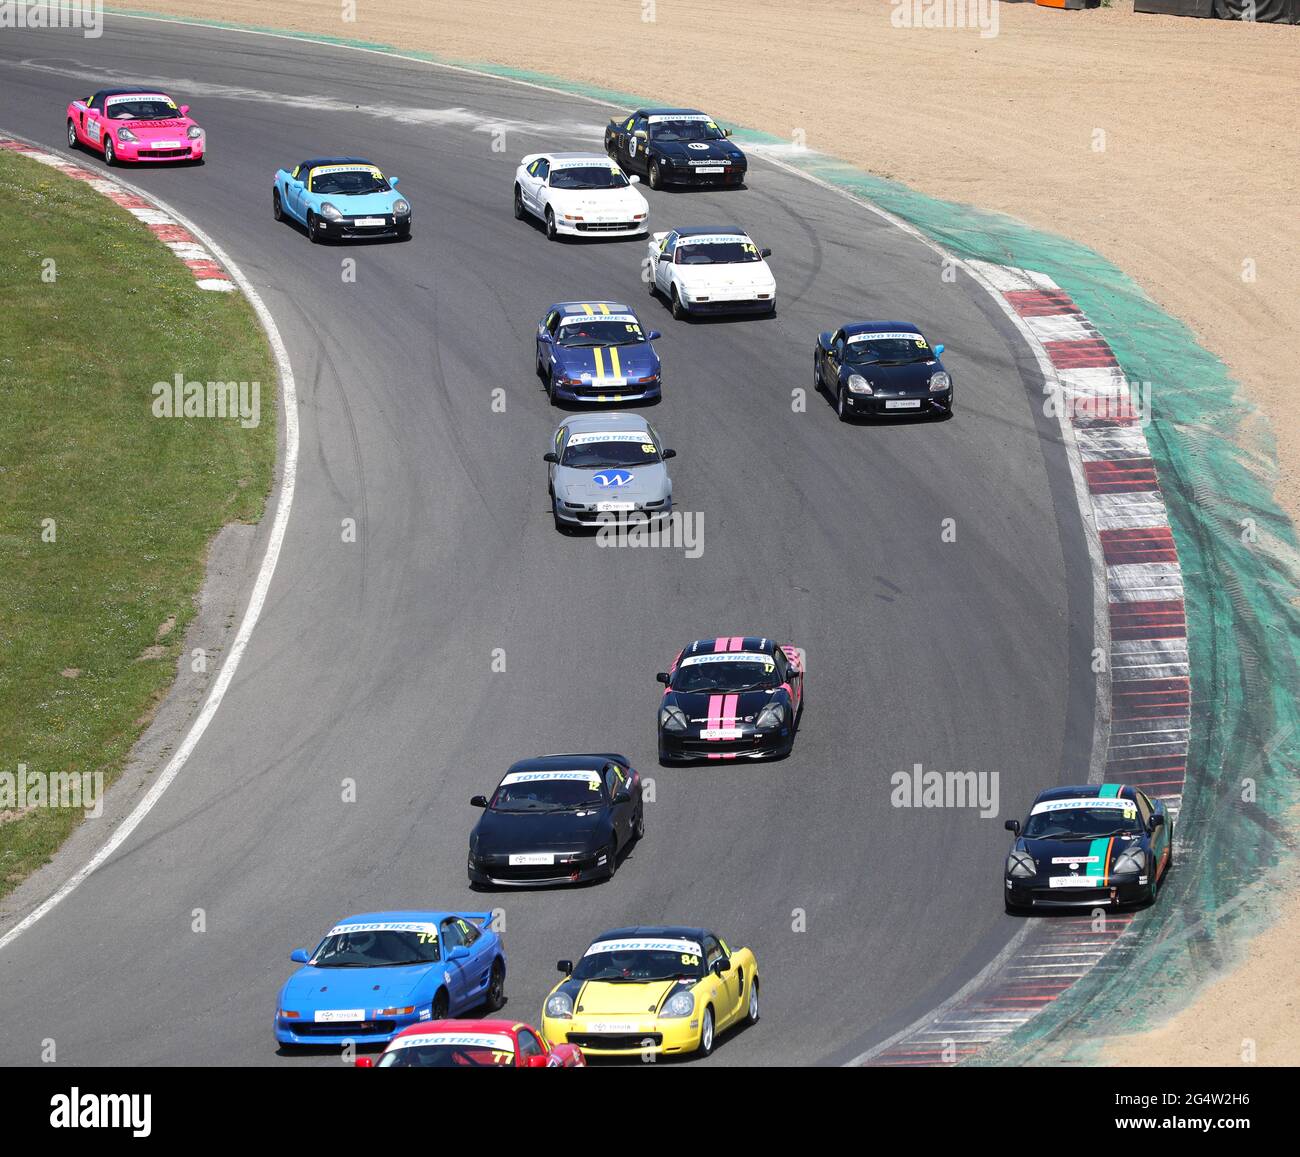 The 750 Motor Club Toyo Tires Toyota MR2 championship held at Brands Hatch, Kent, England.  June 2021. Stock Photo